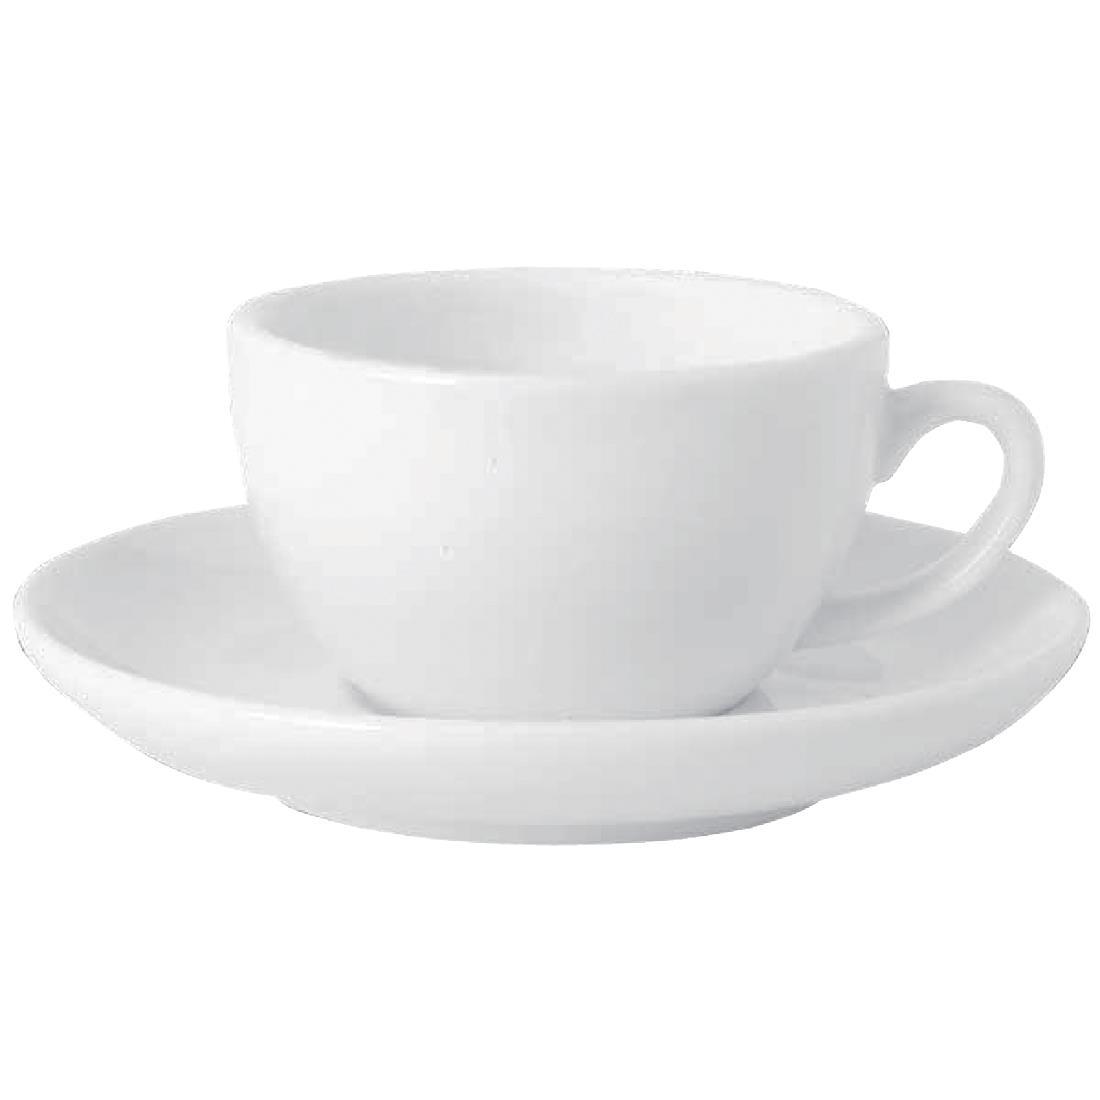 Royal Porcelain Classic White Cappuccino Cups 200ml (Pack of 12) - CG023  - 3